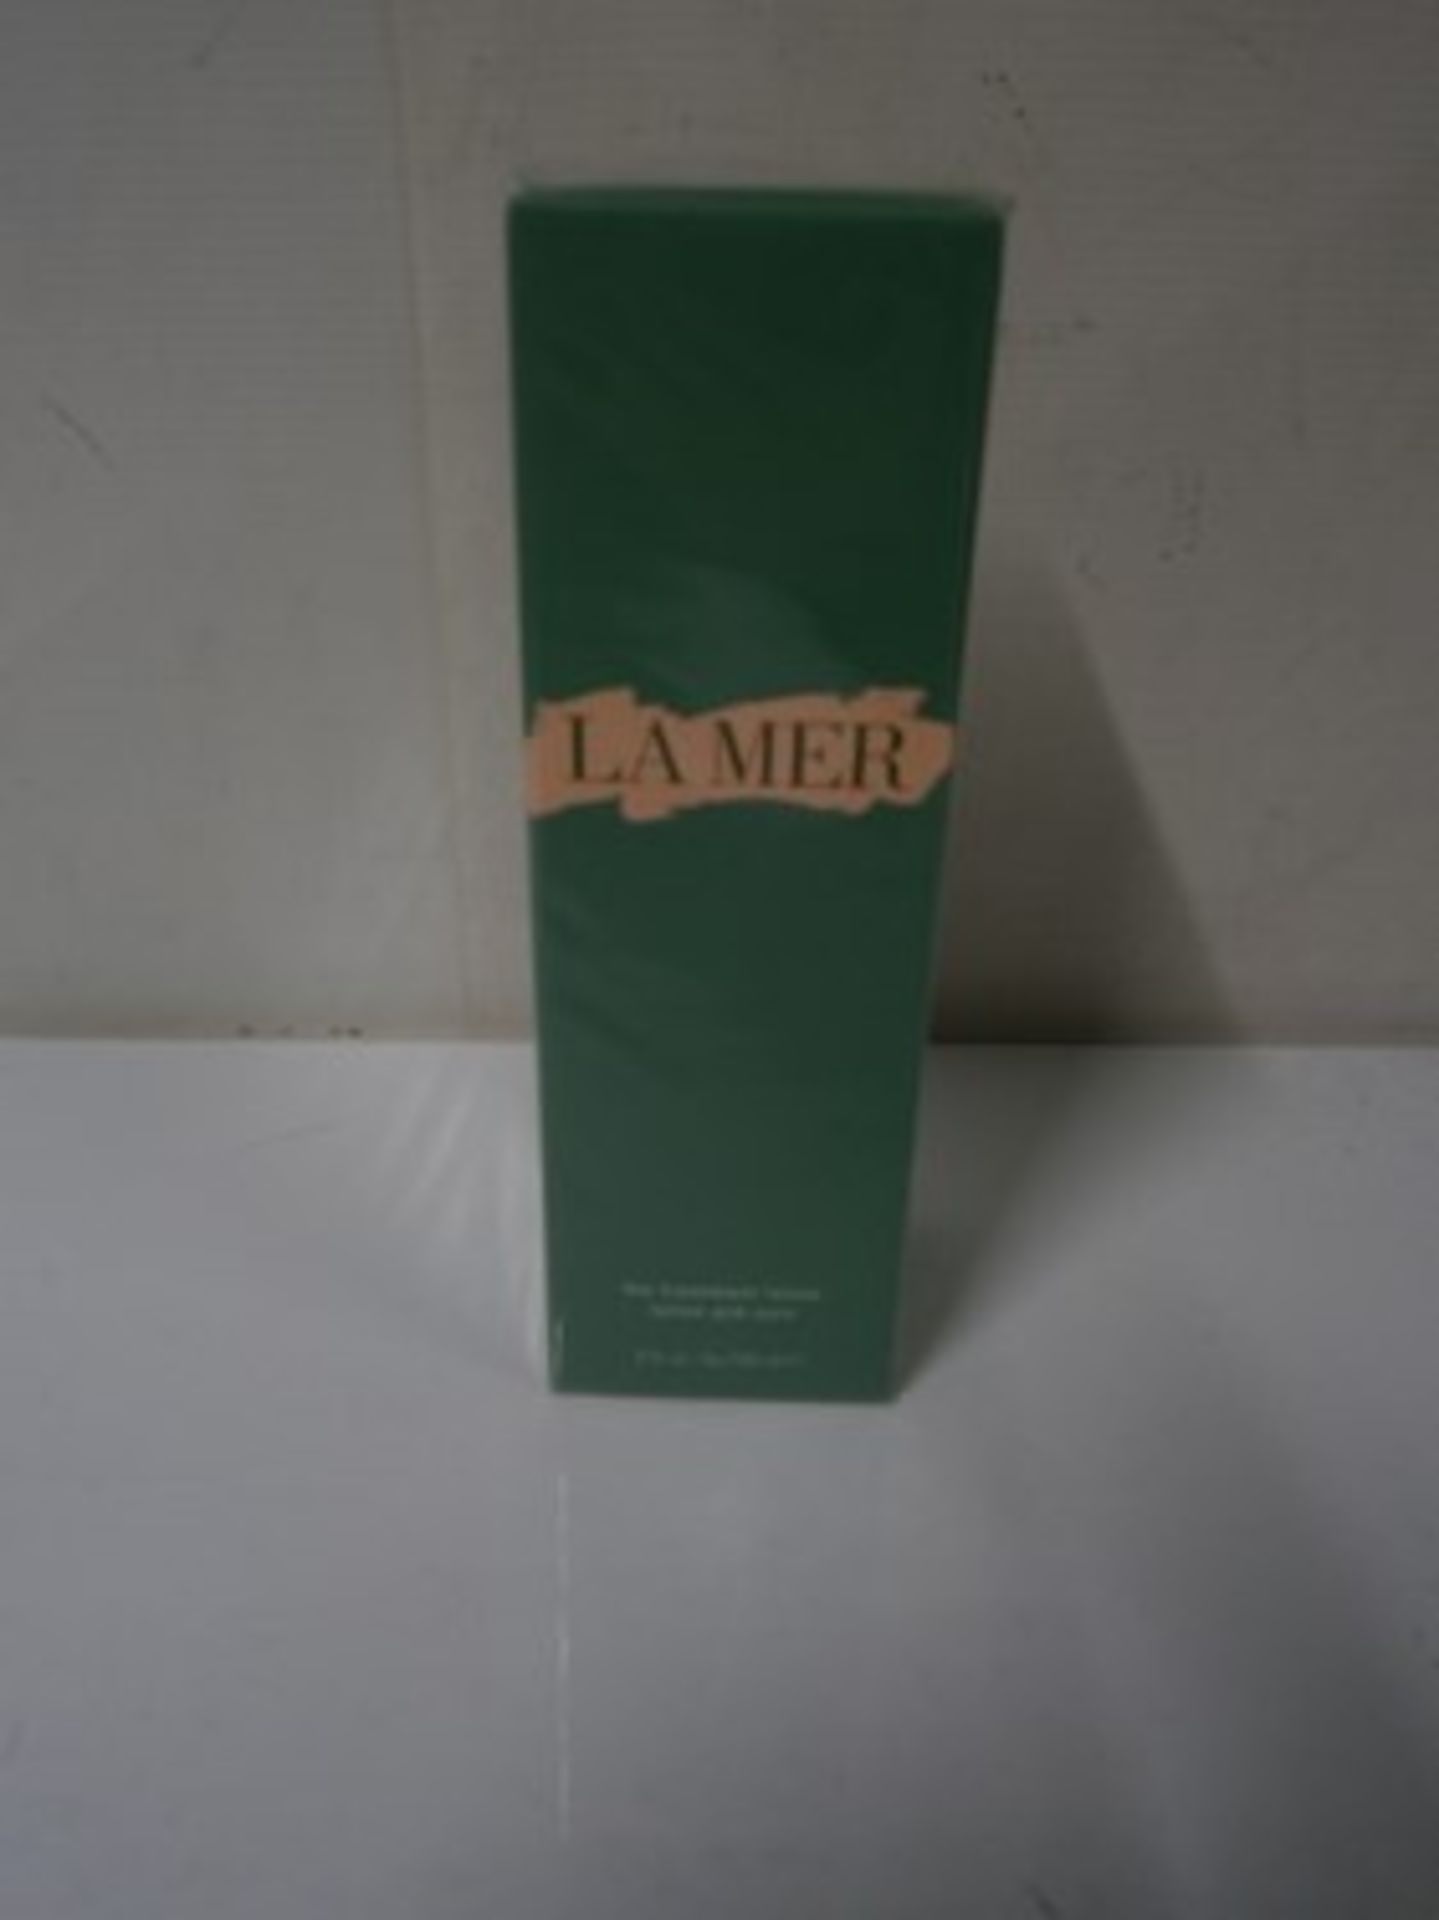 1 x 150ml bottle of La Mer The Treatment lotion - Sealed new in box (C14A)